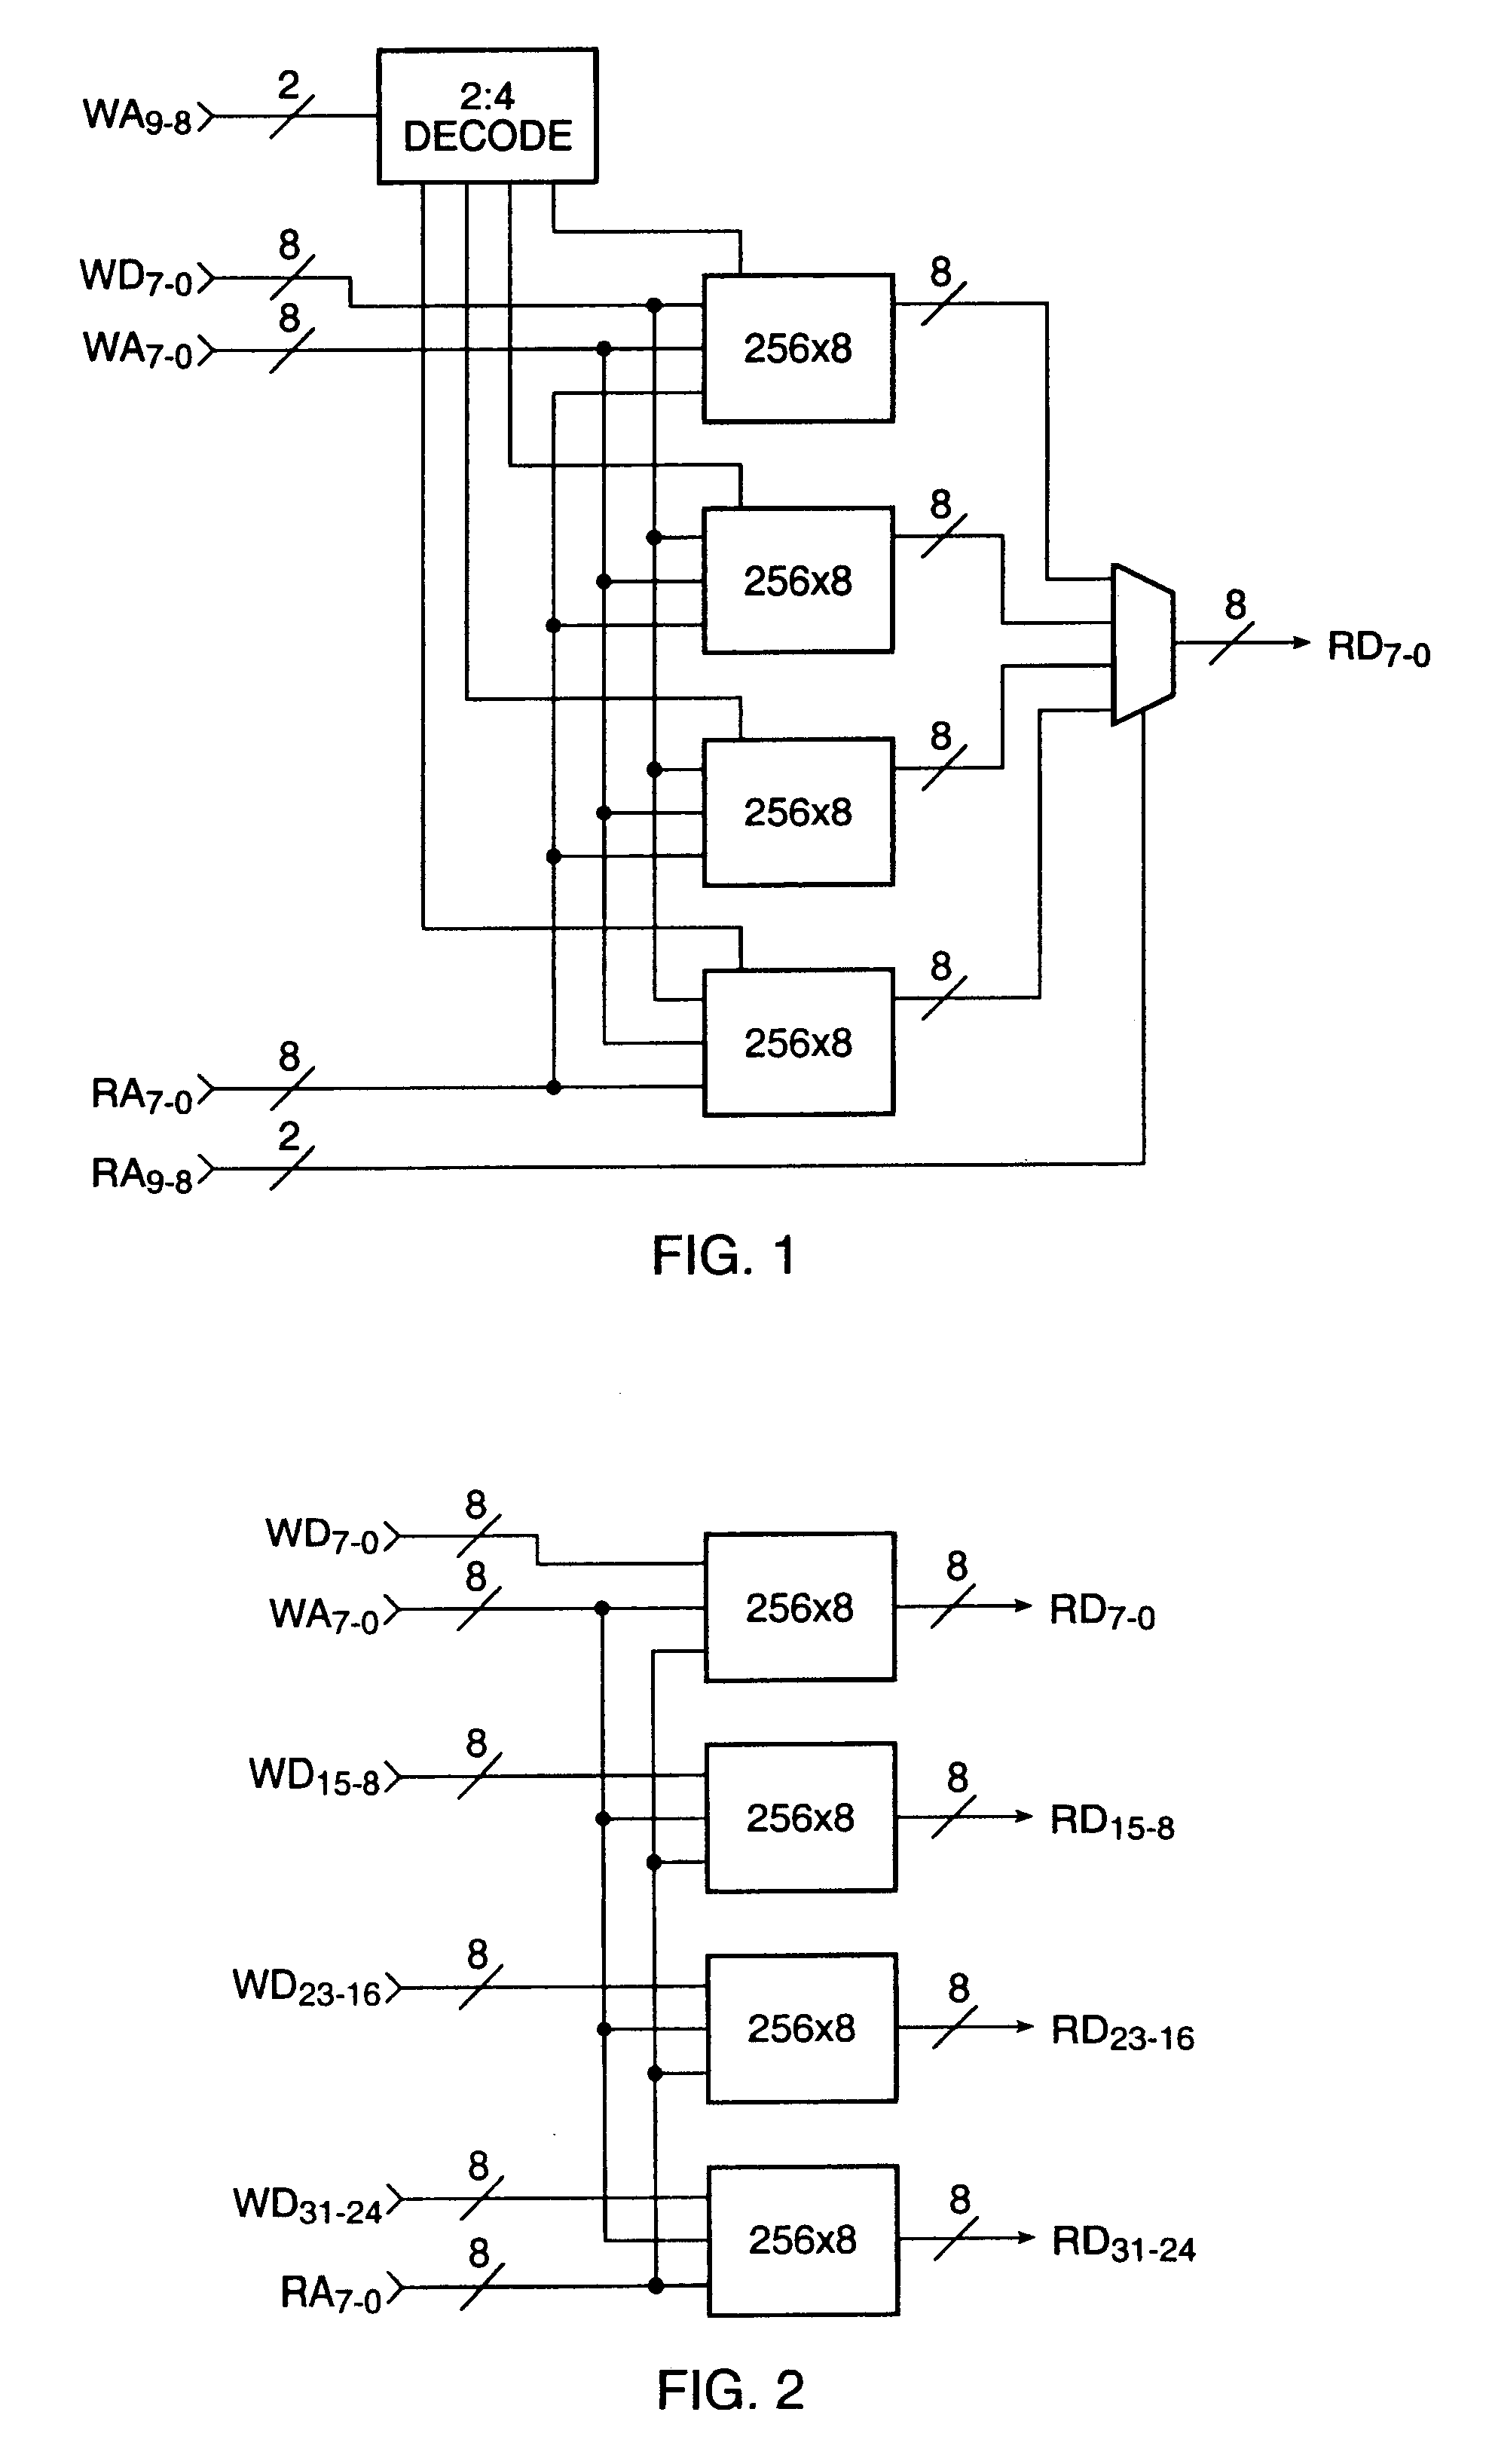 SRAM bus architecture and interconnect to an FPGA